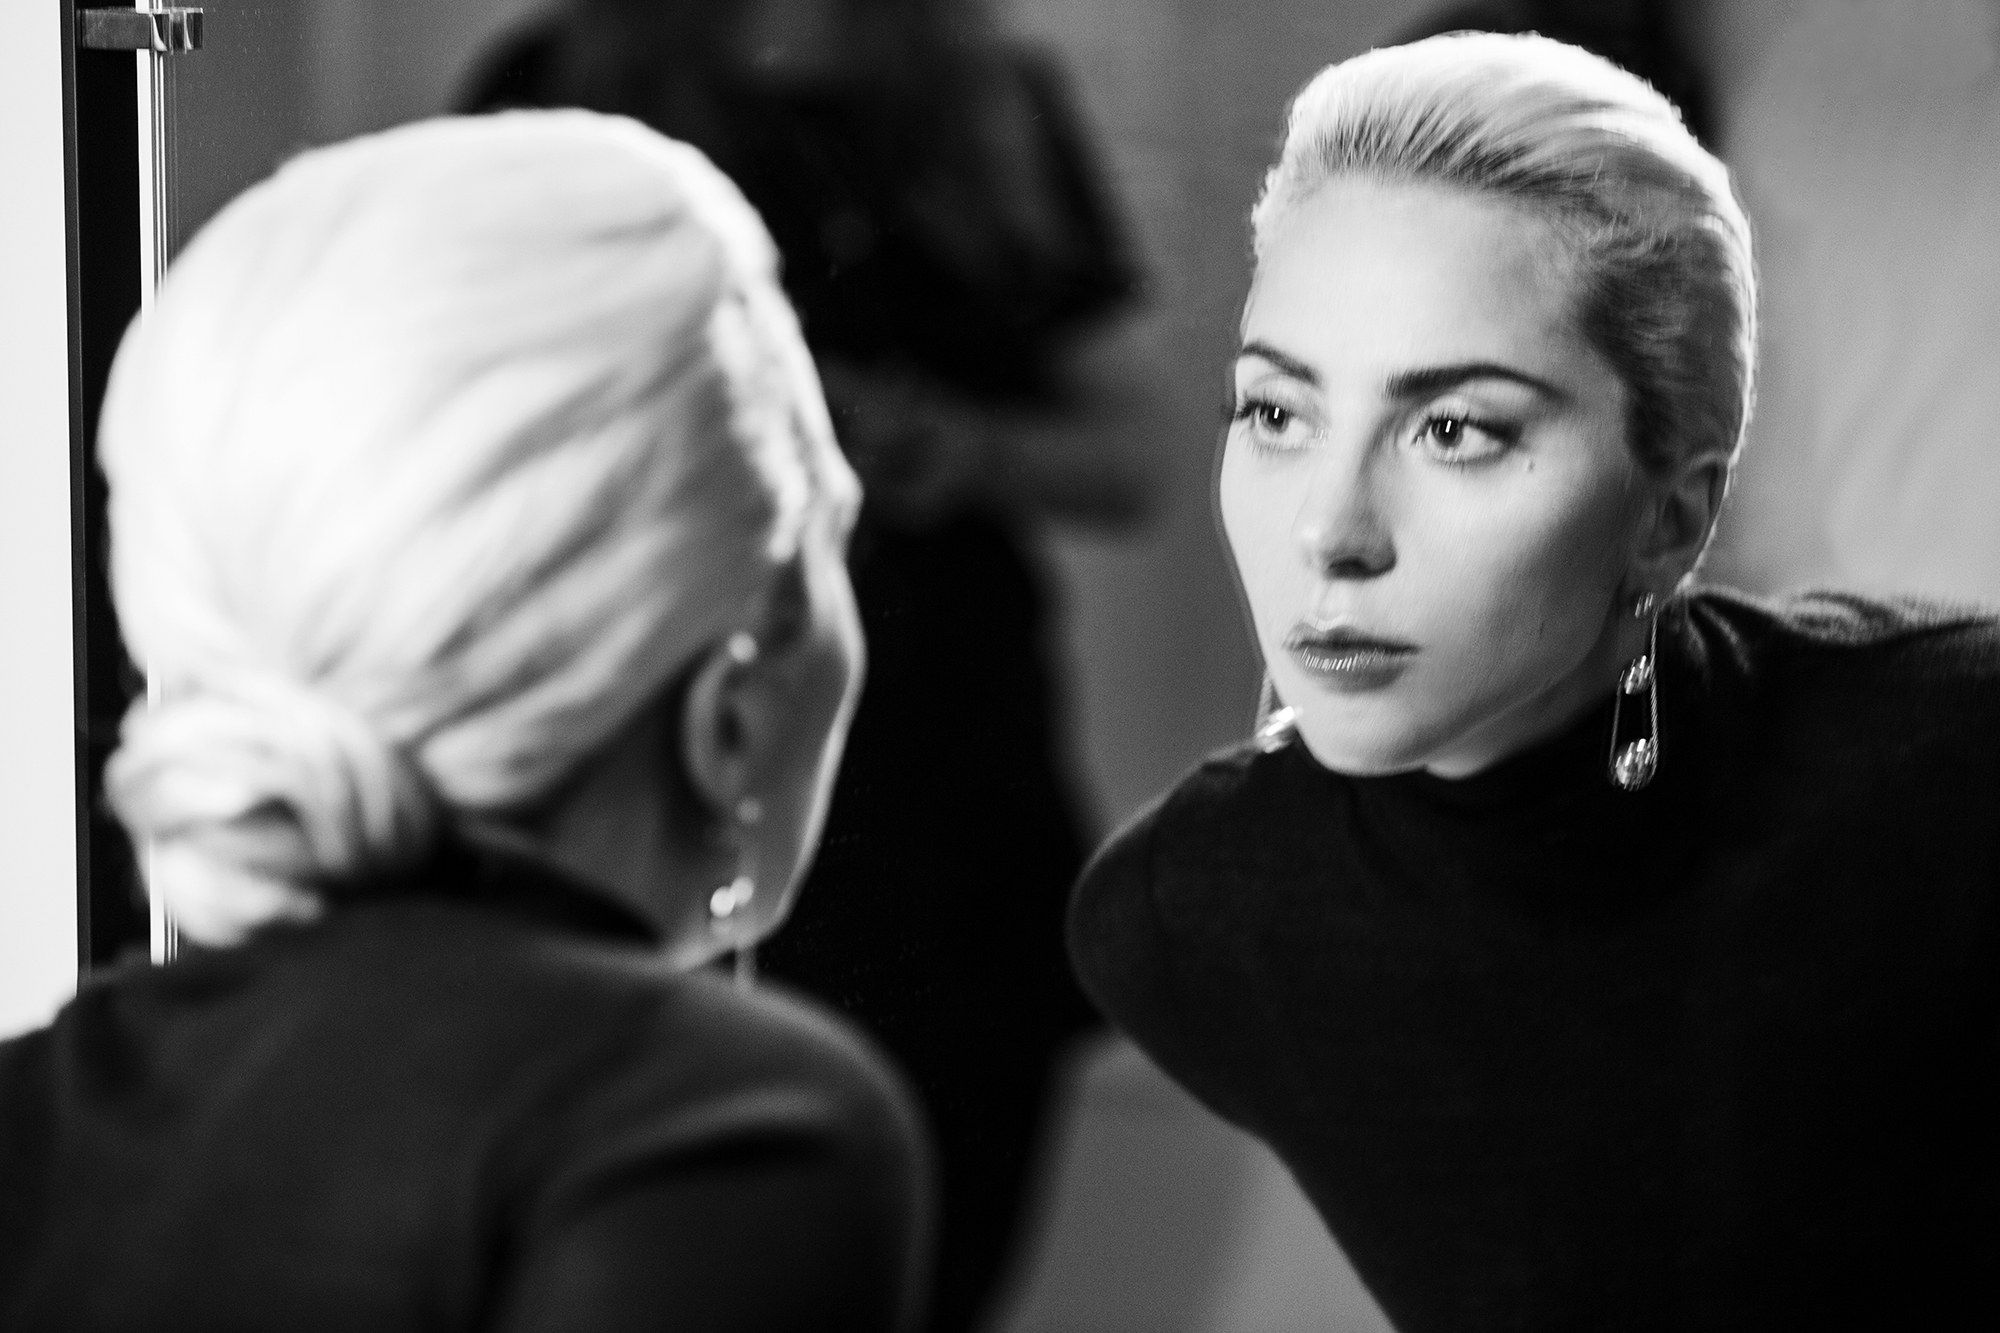 Lady Gaga is the face of Tiffany & Co’s latest campaign